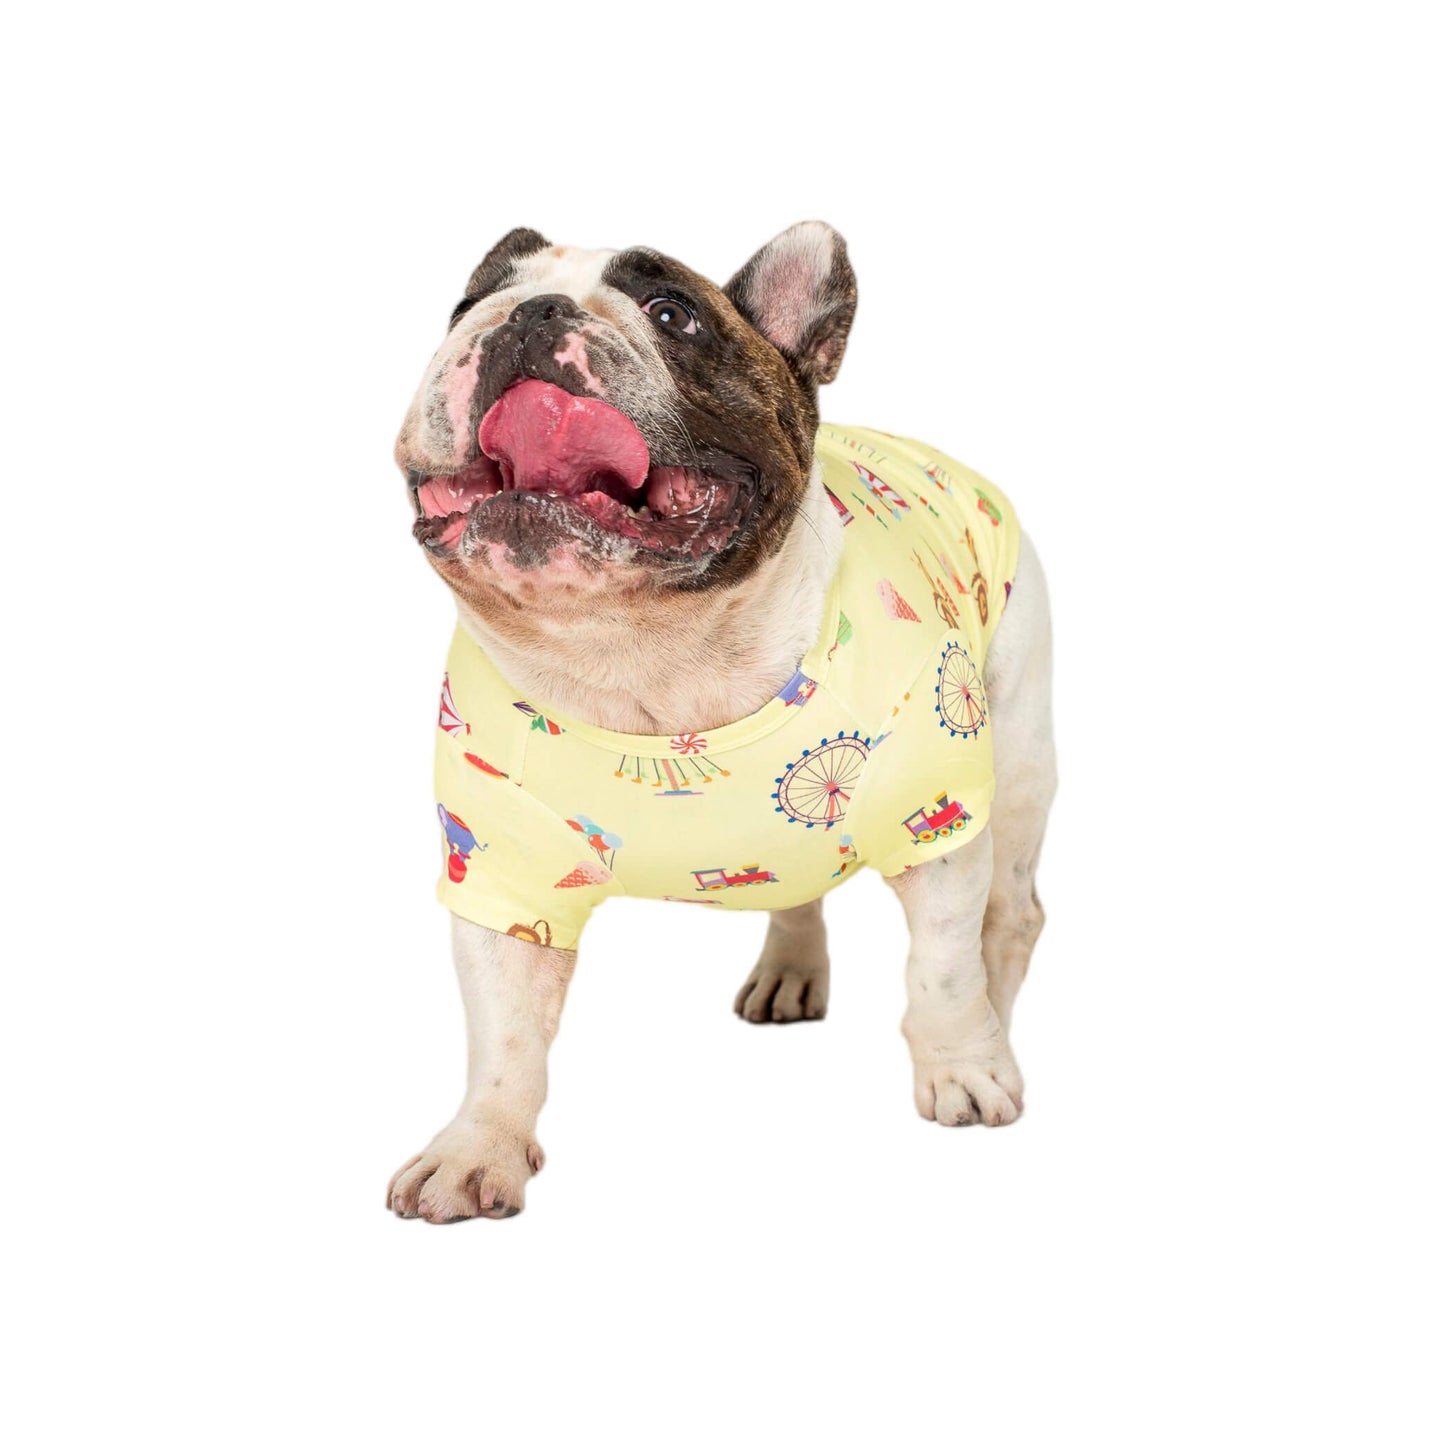 Chester the French Bulldog standing front on wearing a Vibrant Hound Admit one dog shirt. It has carnival theme printed on the dog clothing.